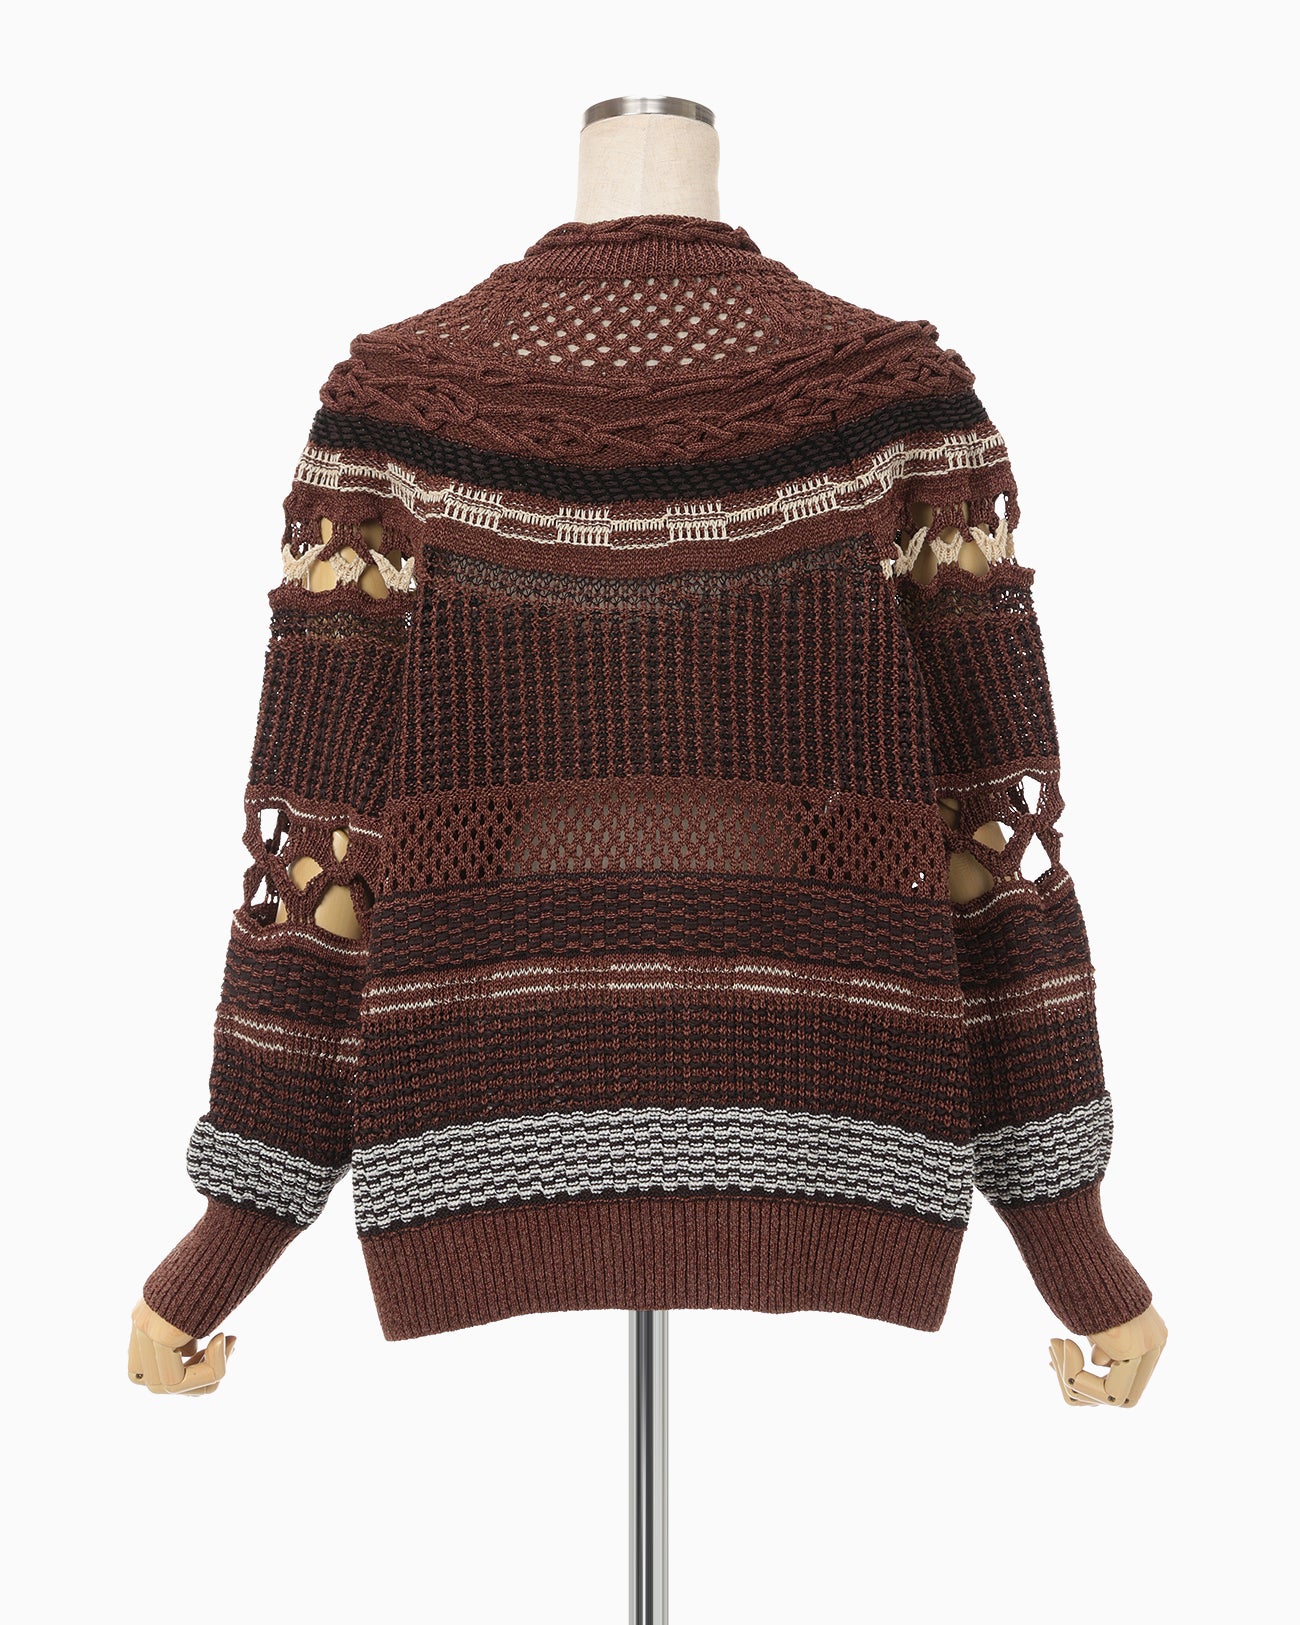 Bamboo Basket Pattern Knitted Top - brown